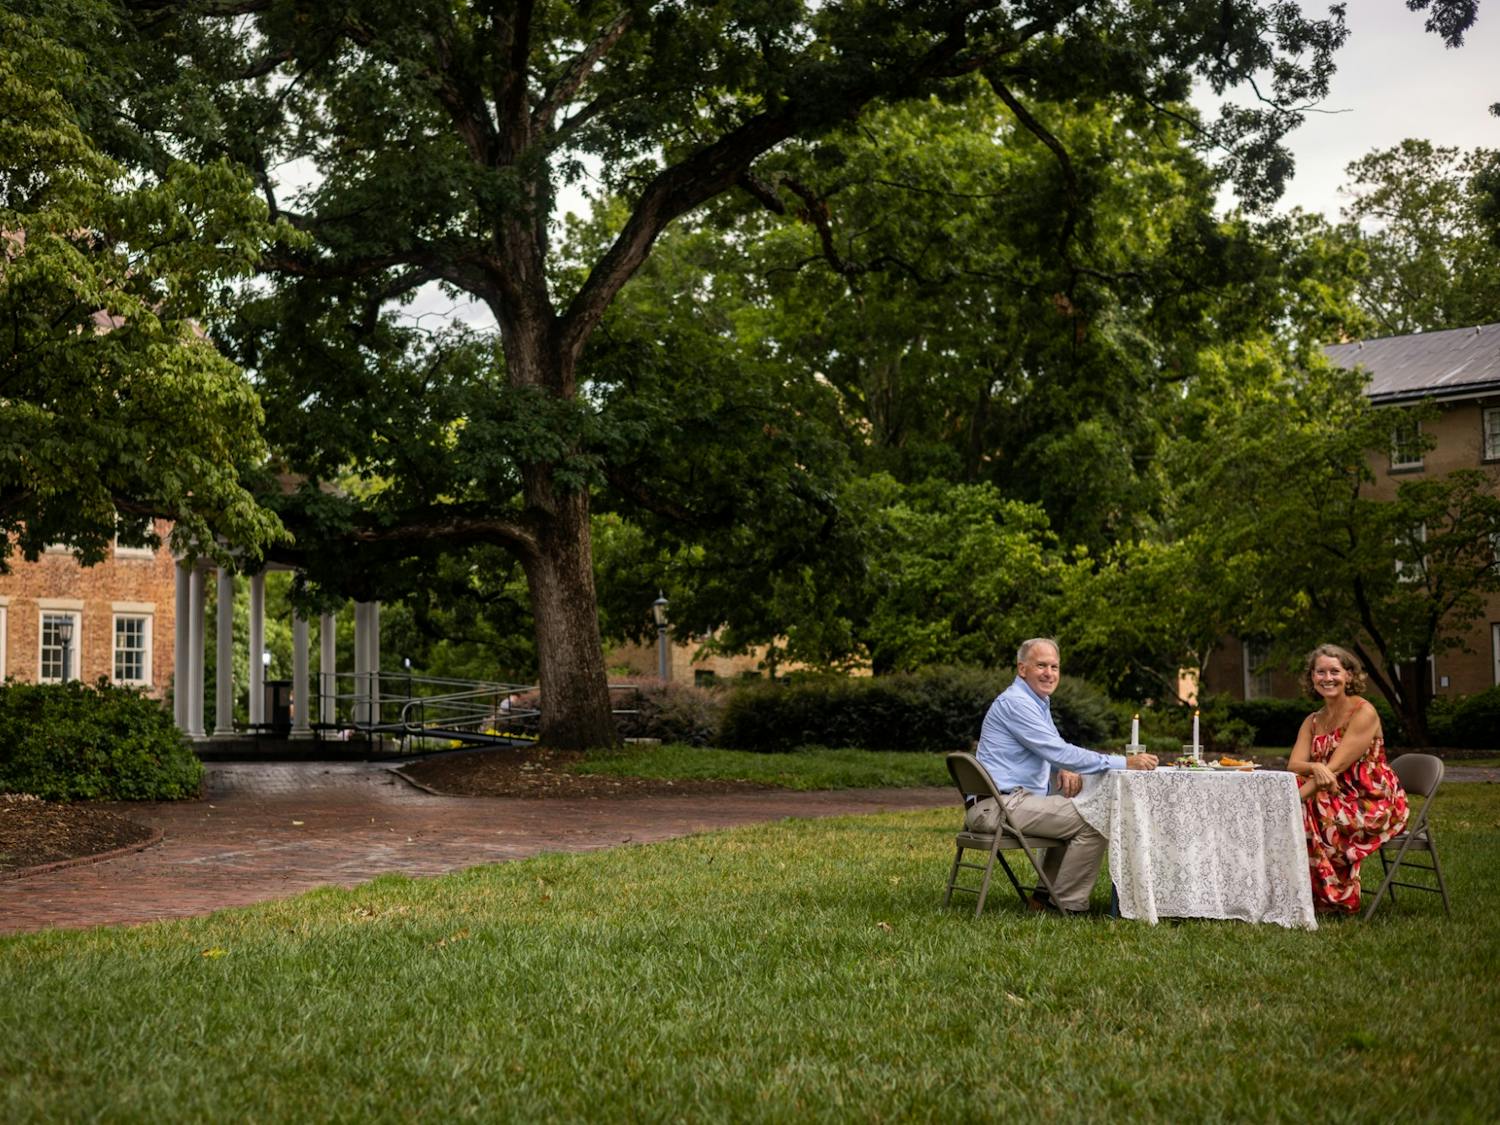 Nancy and Tucker Stevens share a meal in front of the Old Well on July 7, 2022 to celebrate the anniversary of their engagement. Tucker proposed to Nancy 32 years ago in the same spot. Photo by Drew Stevens.